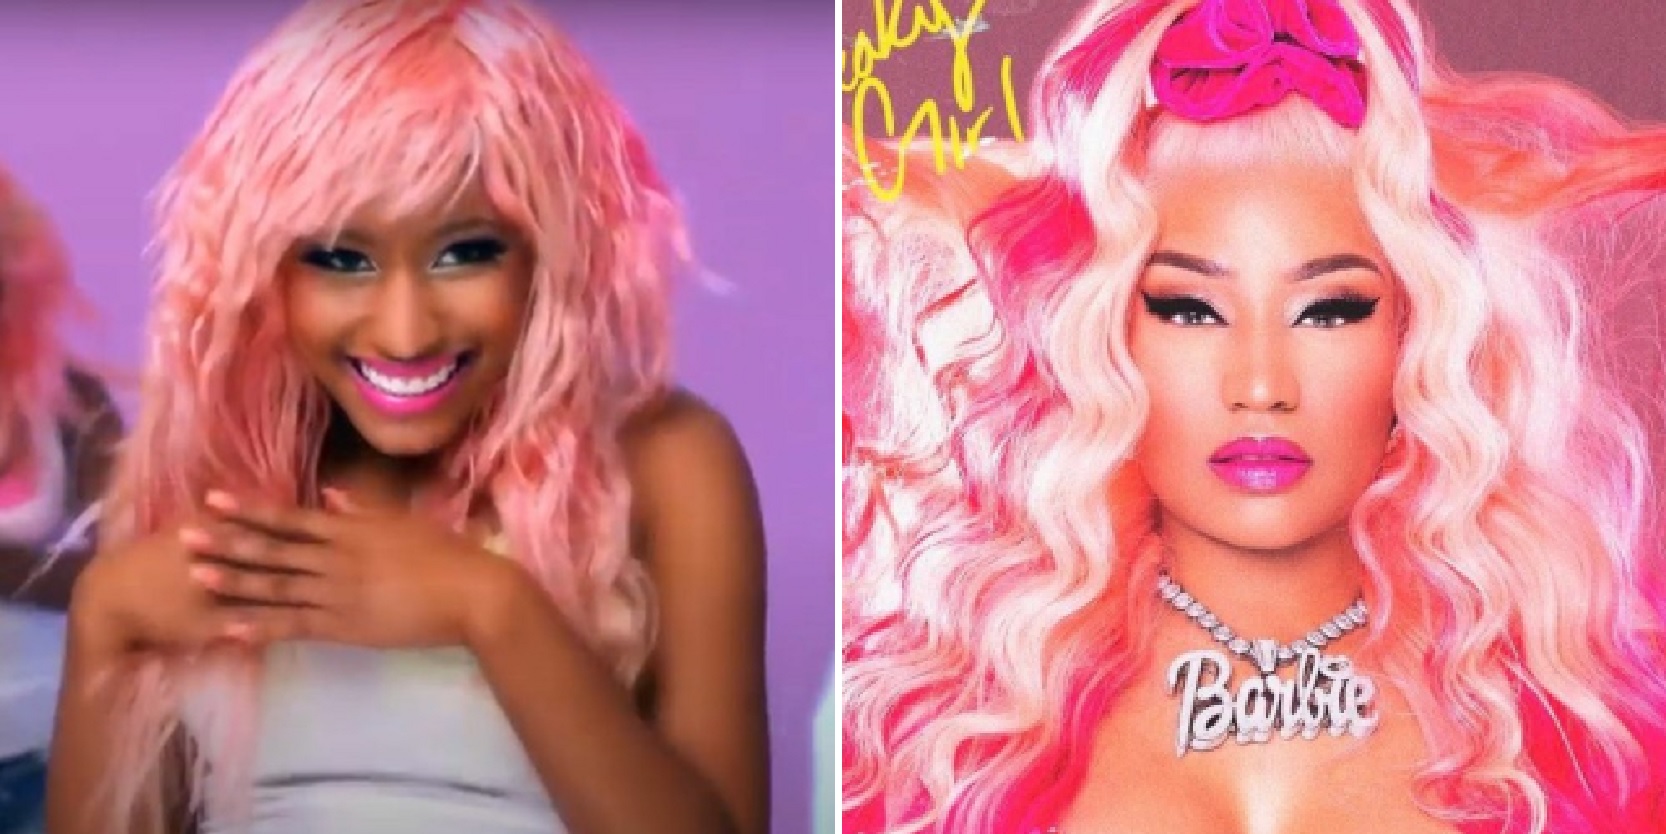 Has Nicki Minaj Brought Back Her ‘Super Bass’ Sound With New Song ‘Super Freaky Girl’?